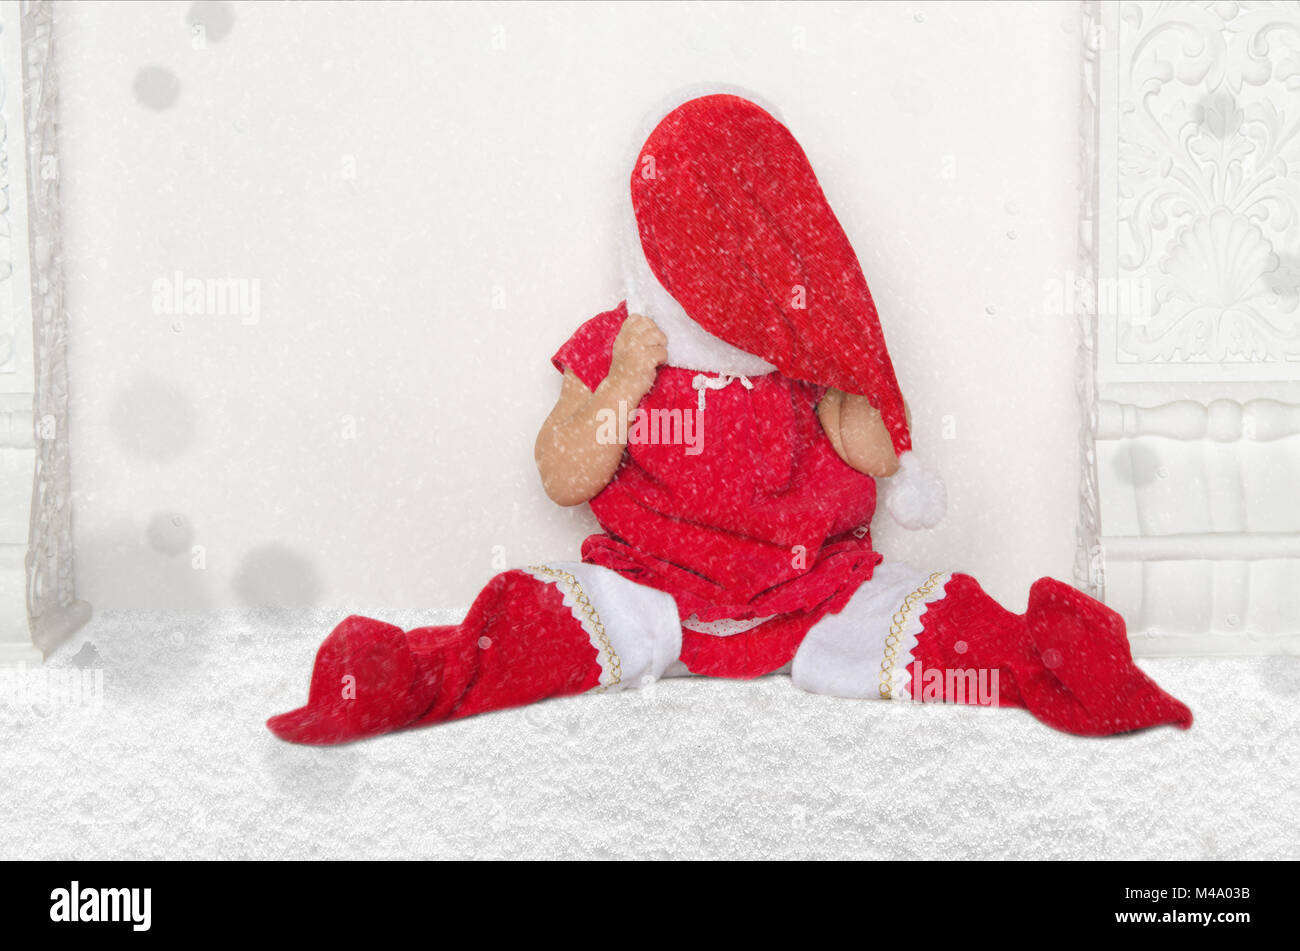 Small girl in Santa suit sitting on floor with snow Stock Photo